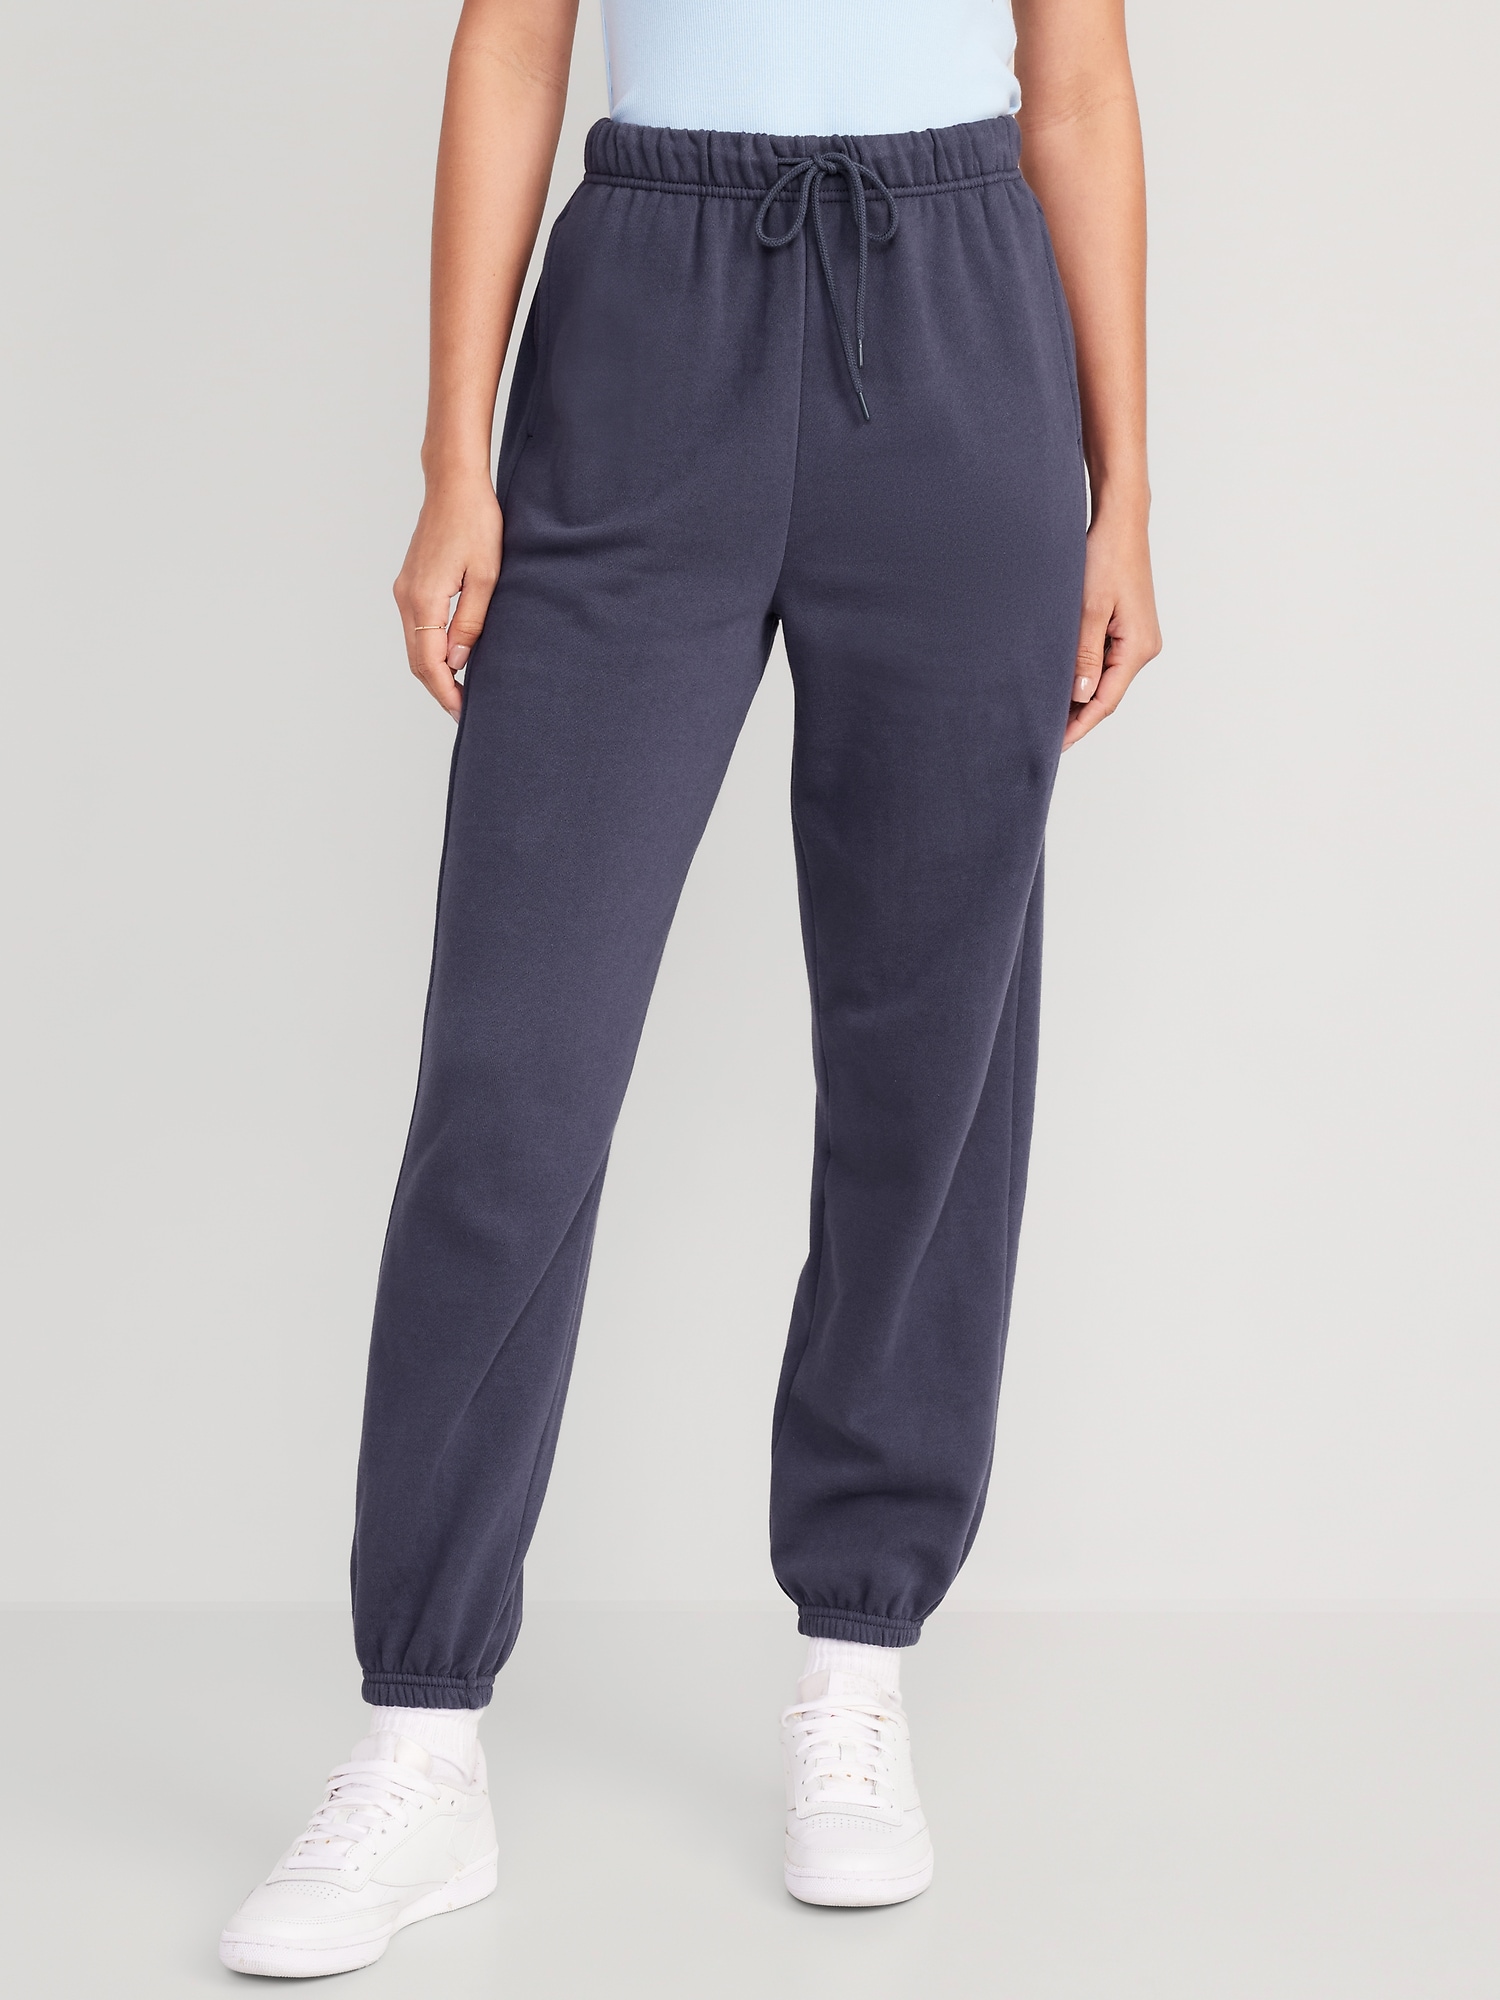 Extra High-Waisted Jogger Sweatpants for Women | Old Navy